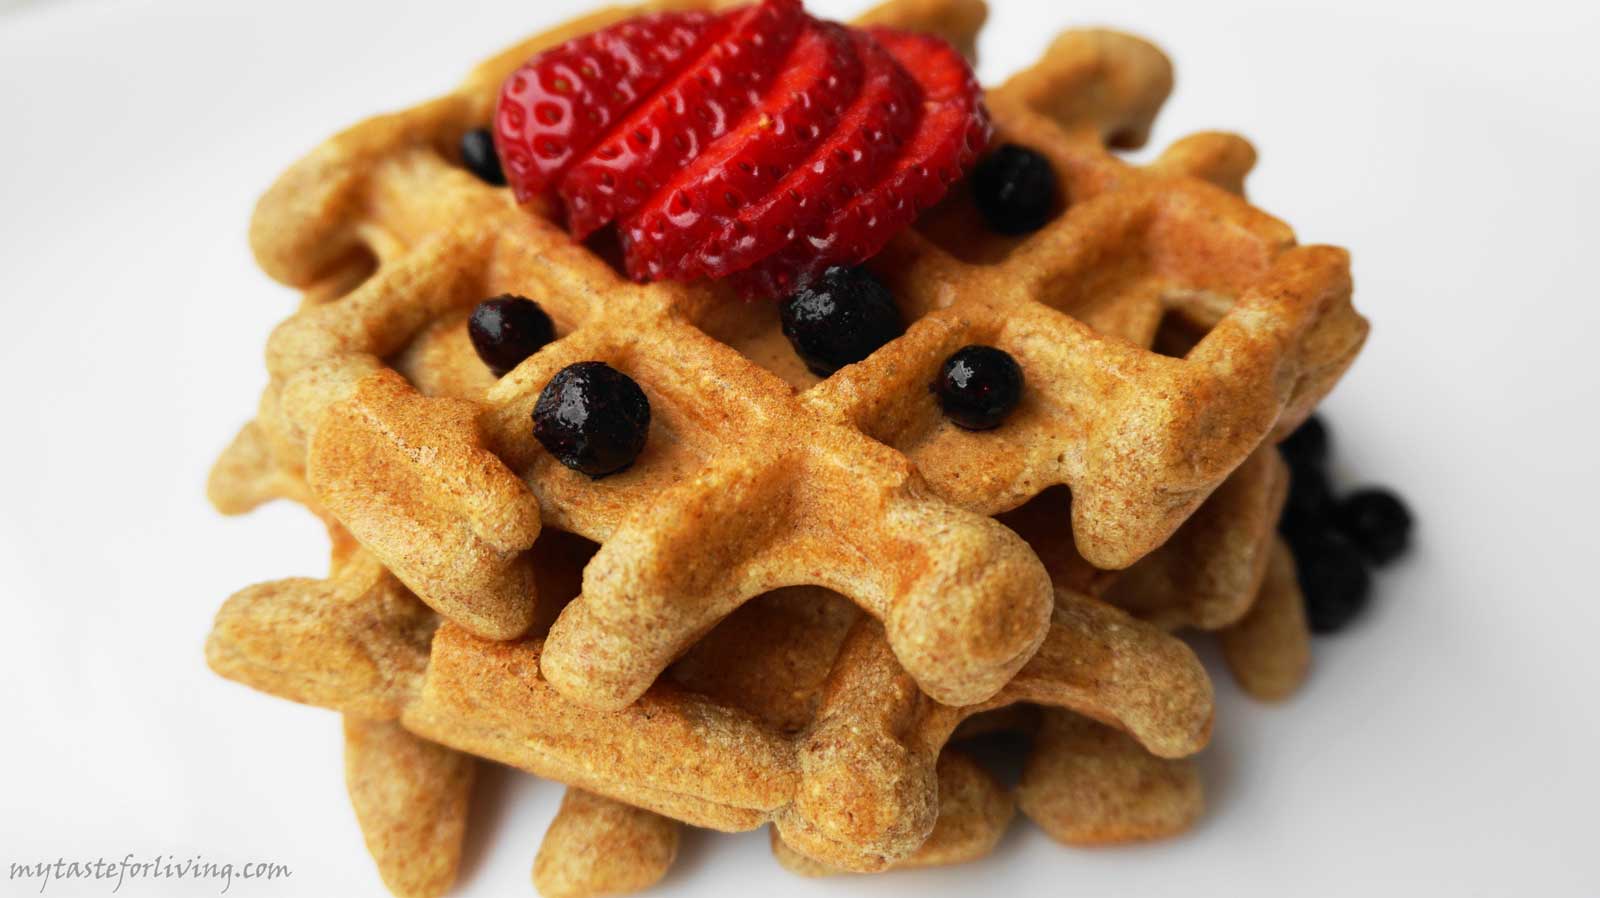 Fluffy and delicious waffles with einkorn flour